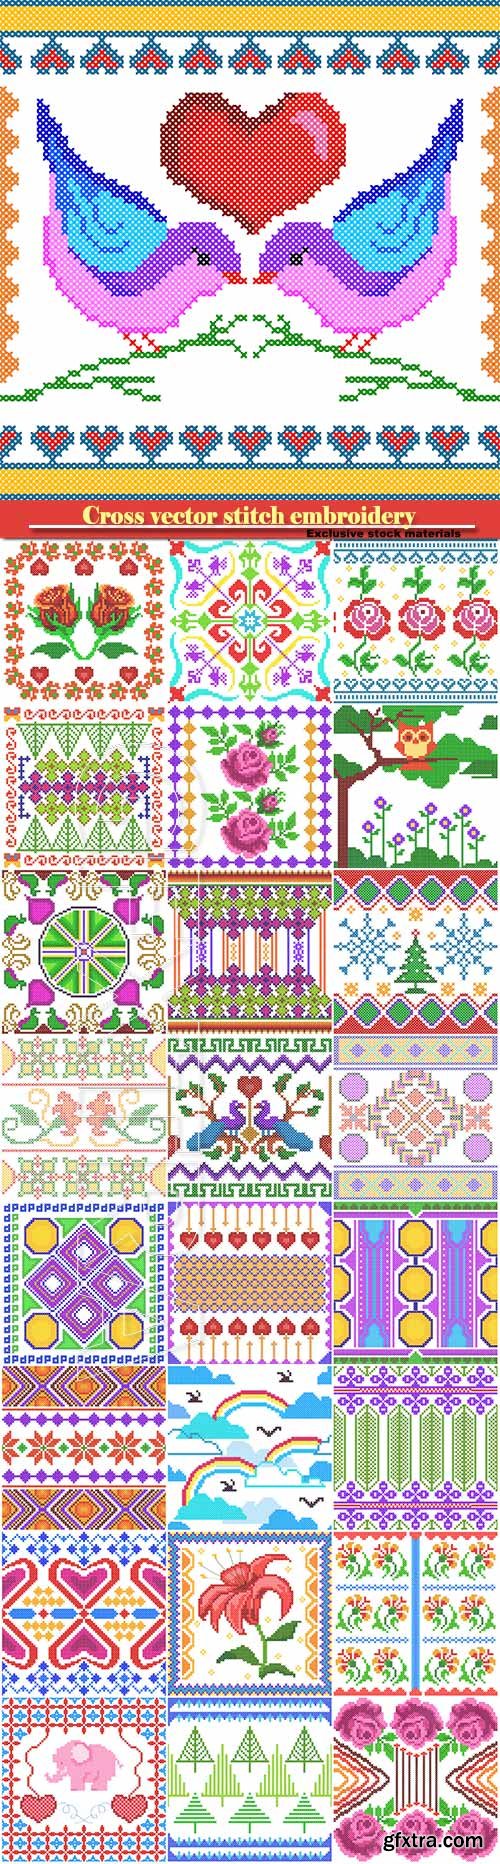 Cross vector stitch embroidery, floral design for seamless pattern texture